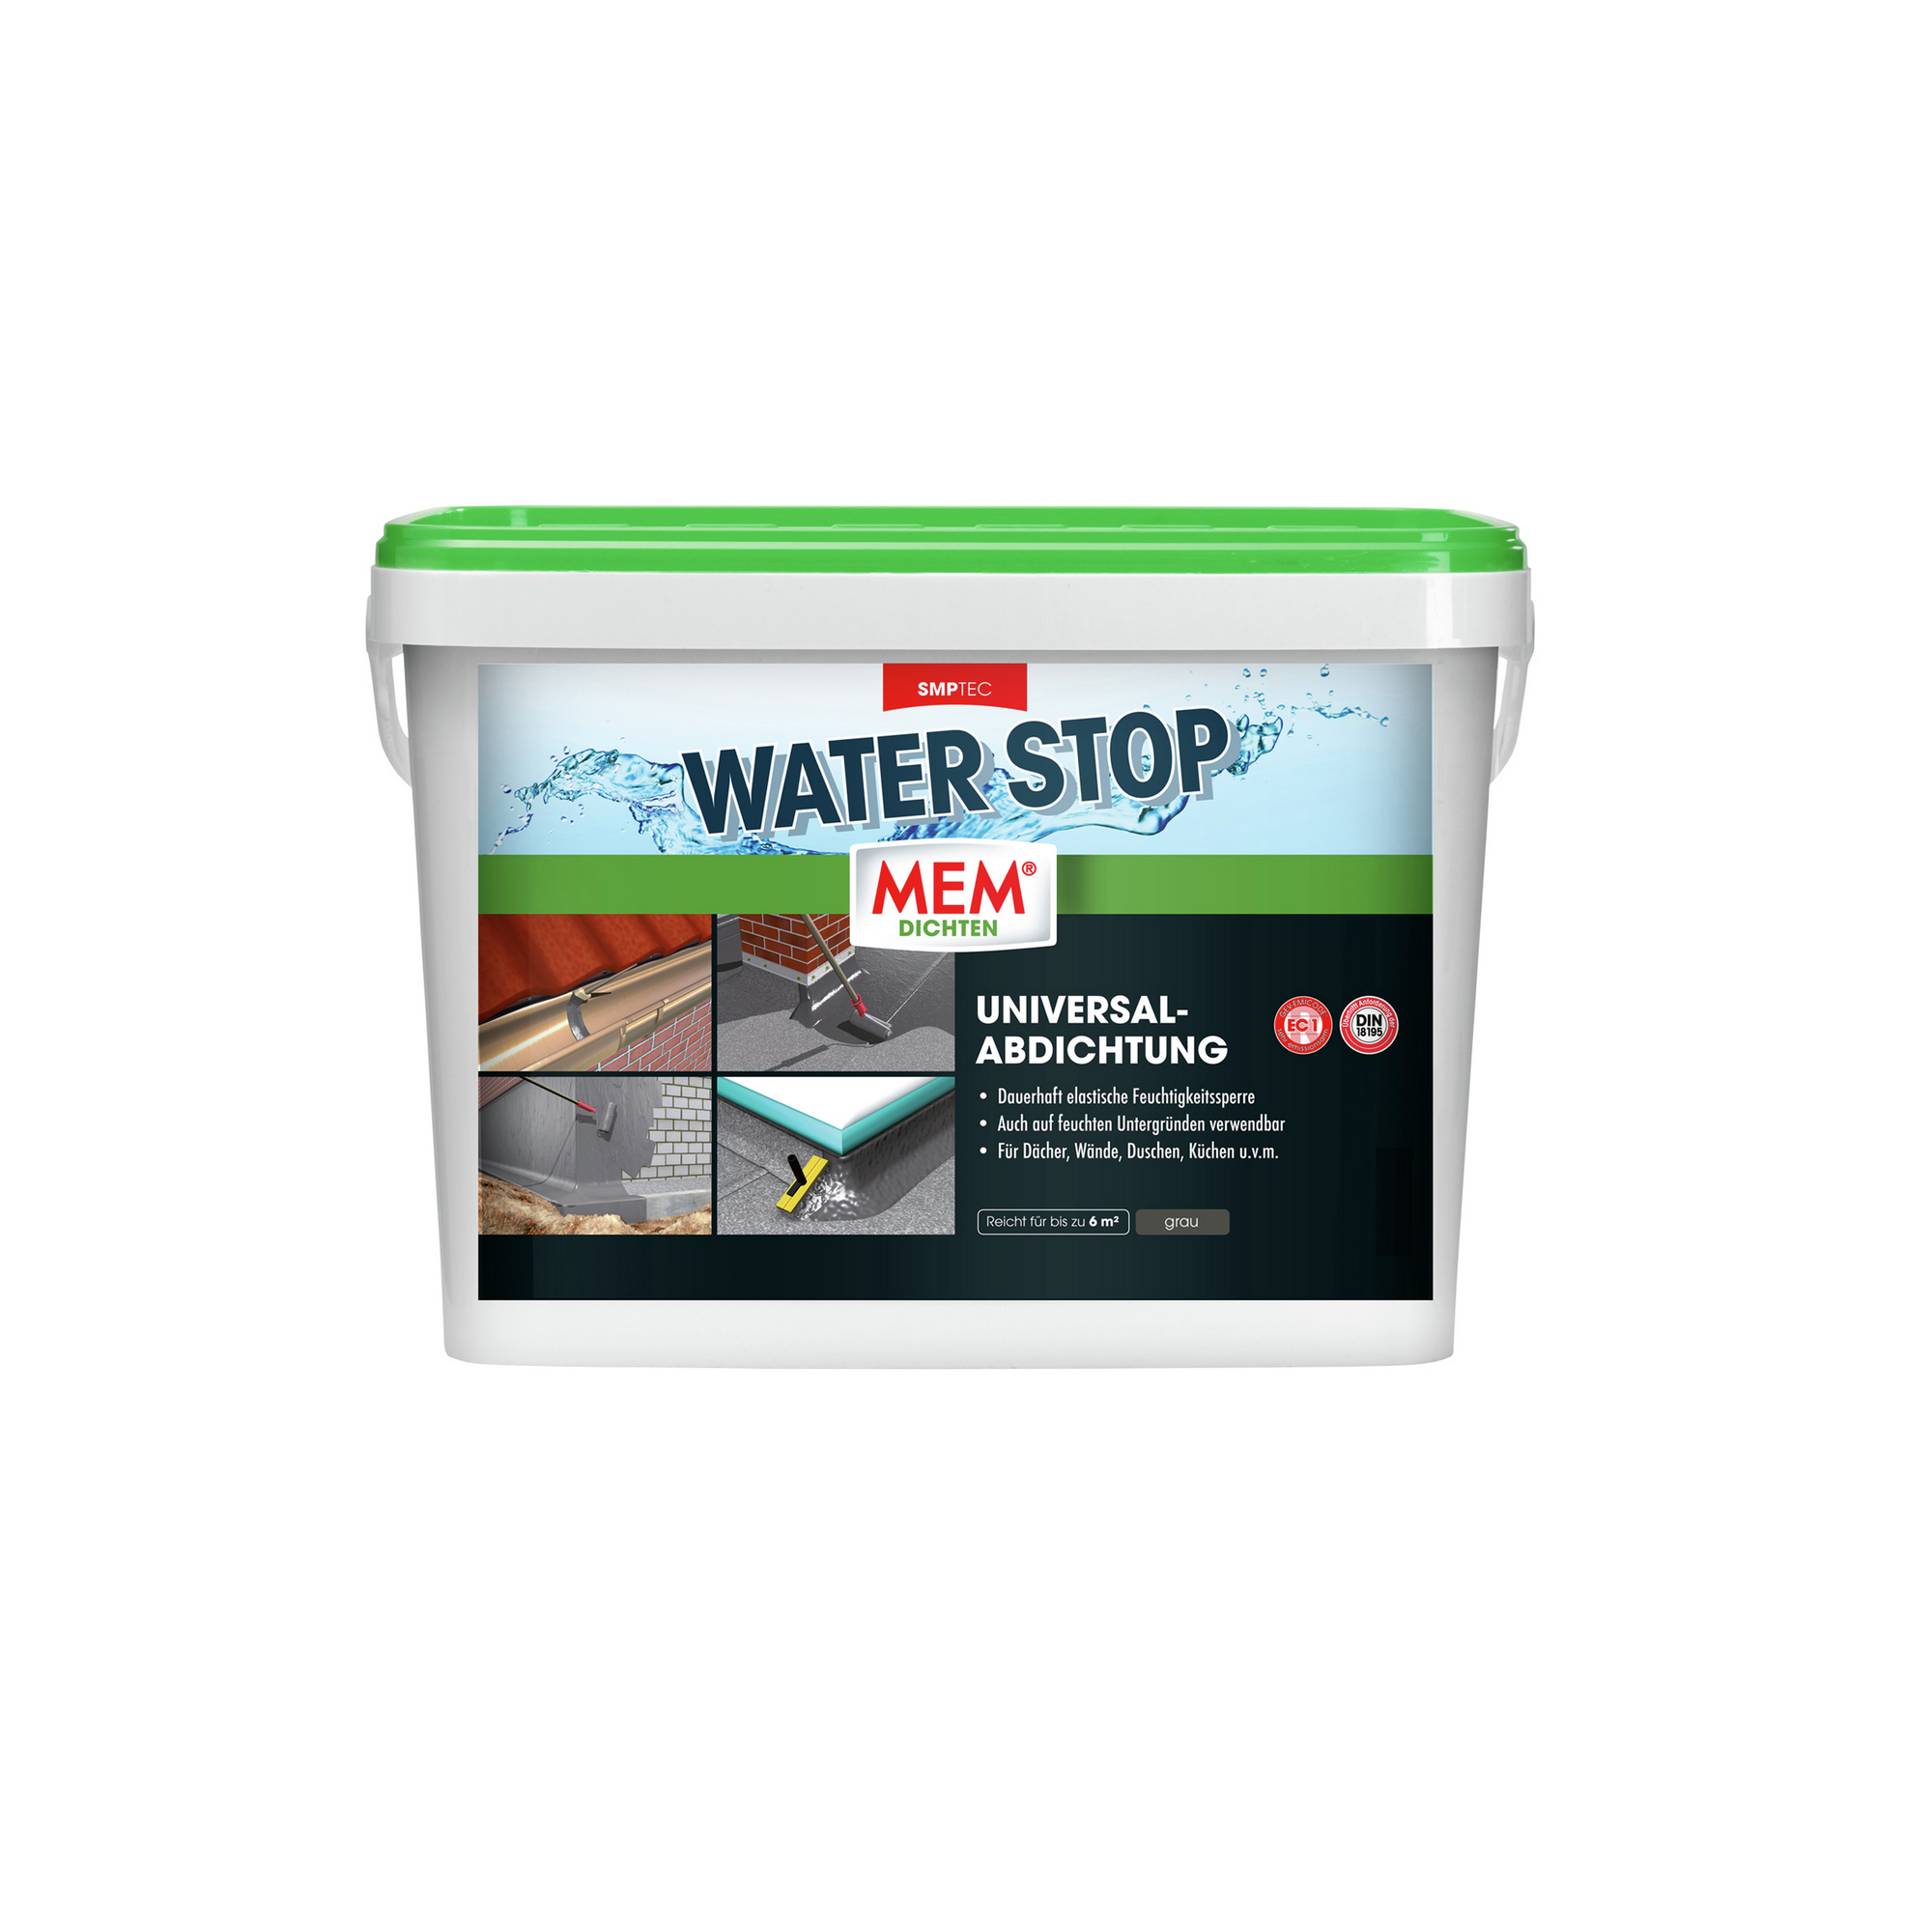 Universal-Abdichtung 'Water Stop' 14 kg + product picture